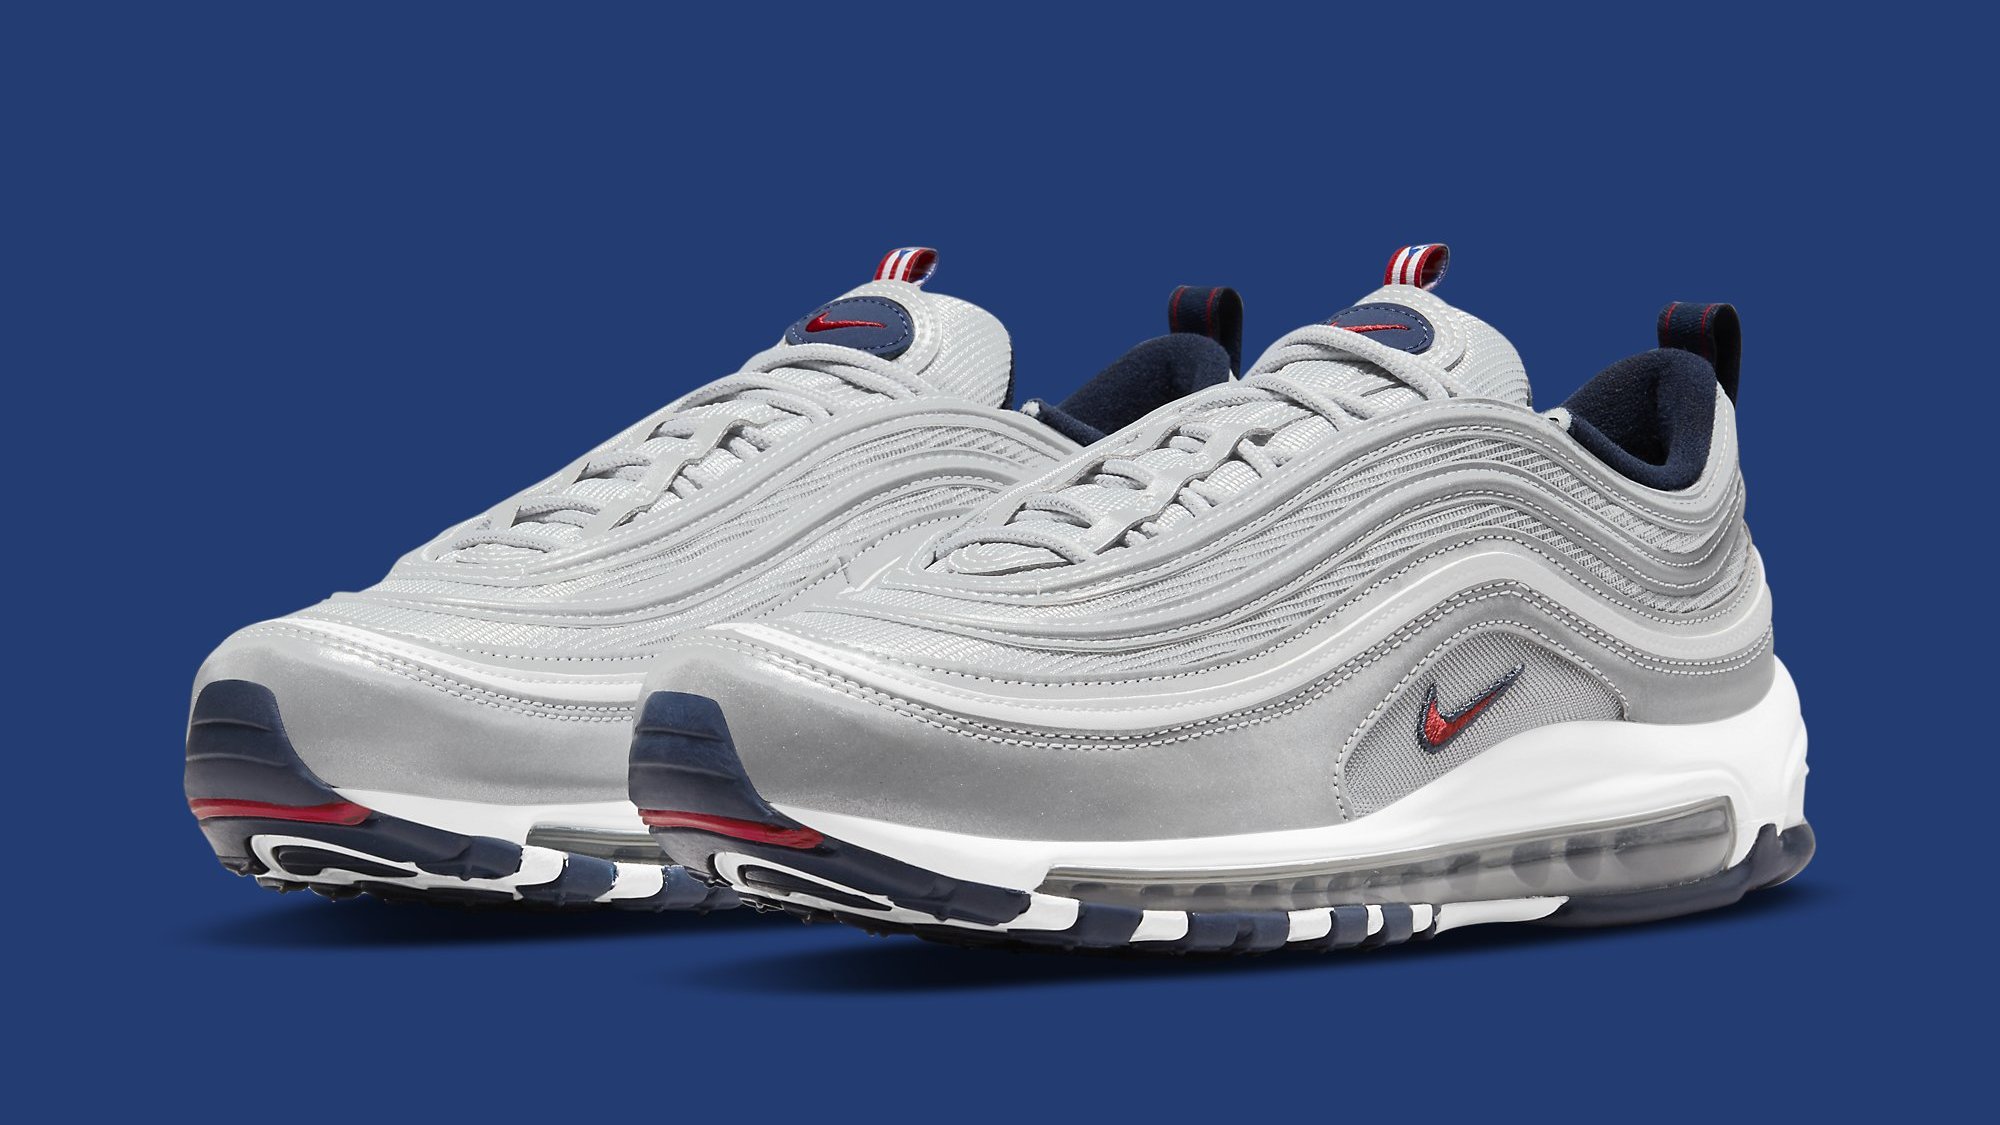 Nike Air Max 97 OG / PRD 'Puerto Rico' DH2319-001 Release Date | Sole Collector